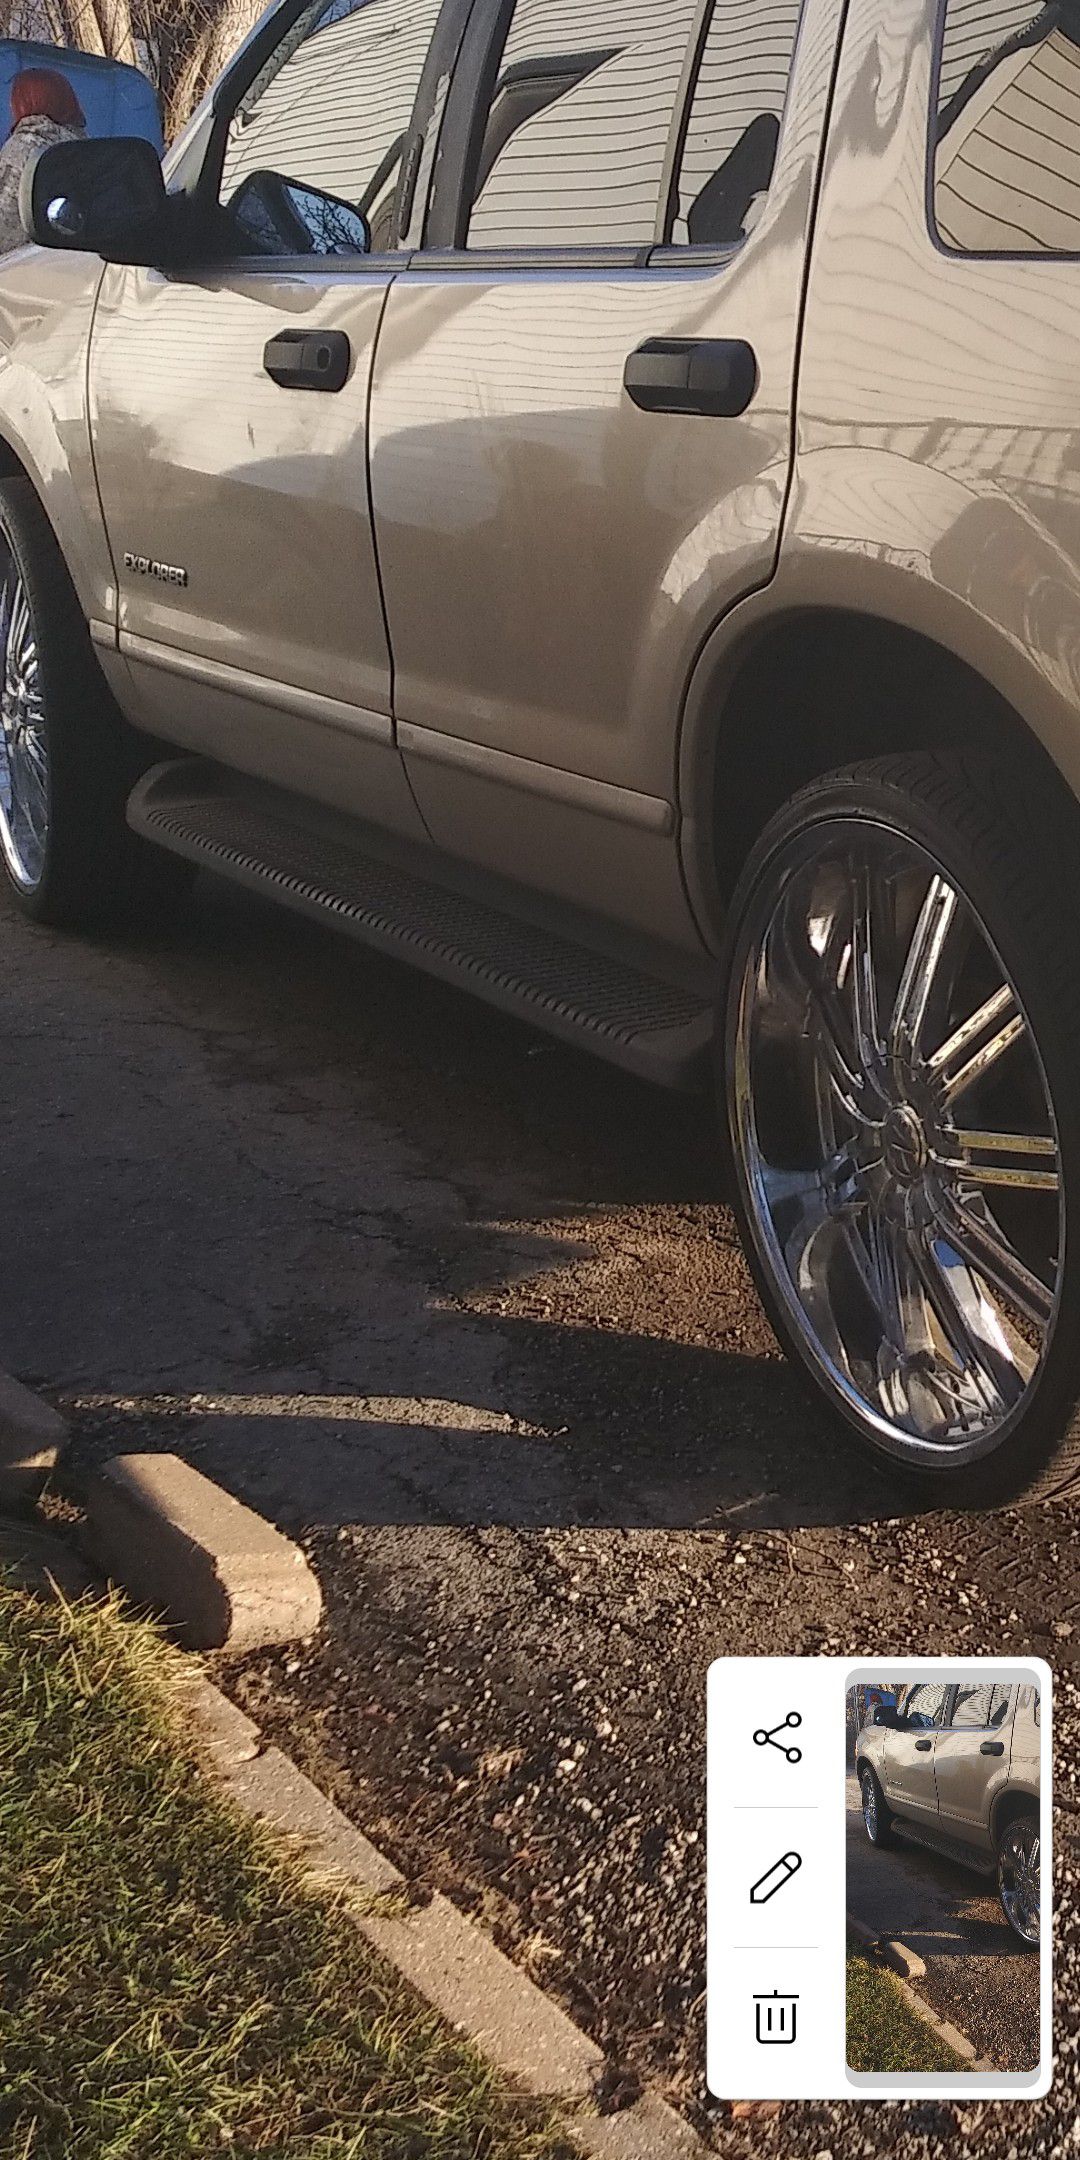 Trade for a newer cell phone and a little money 24 inch rims 5 lug Universal have minor Ben behold are not all of them have Ben though